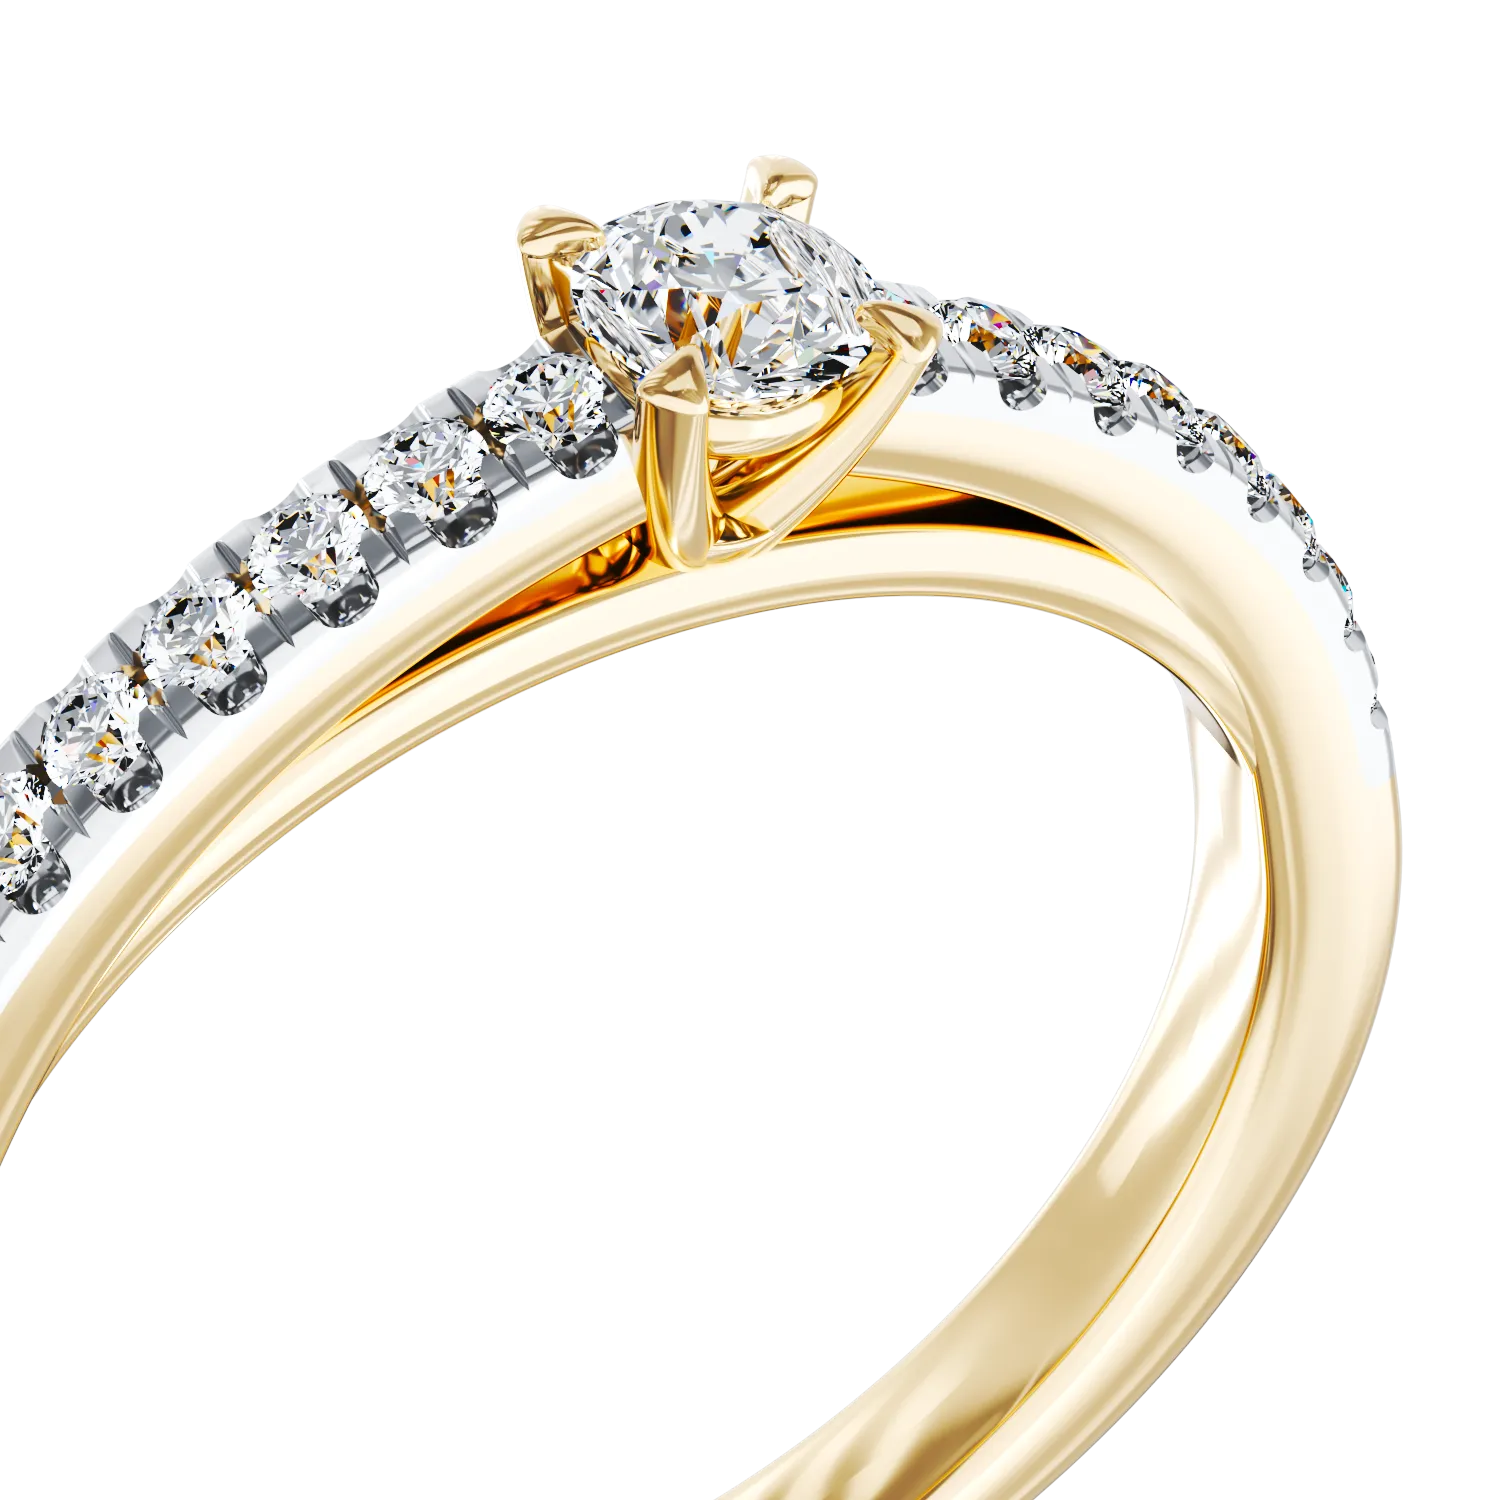 18K yellow gold engagement ring with 0.112ct diamond and 0.148ct diamonds